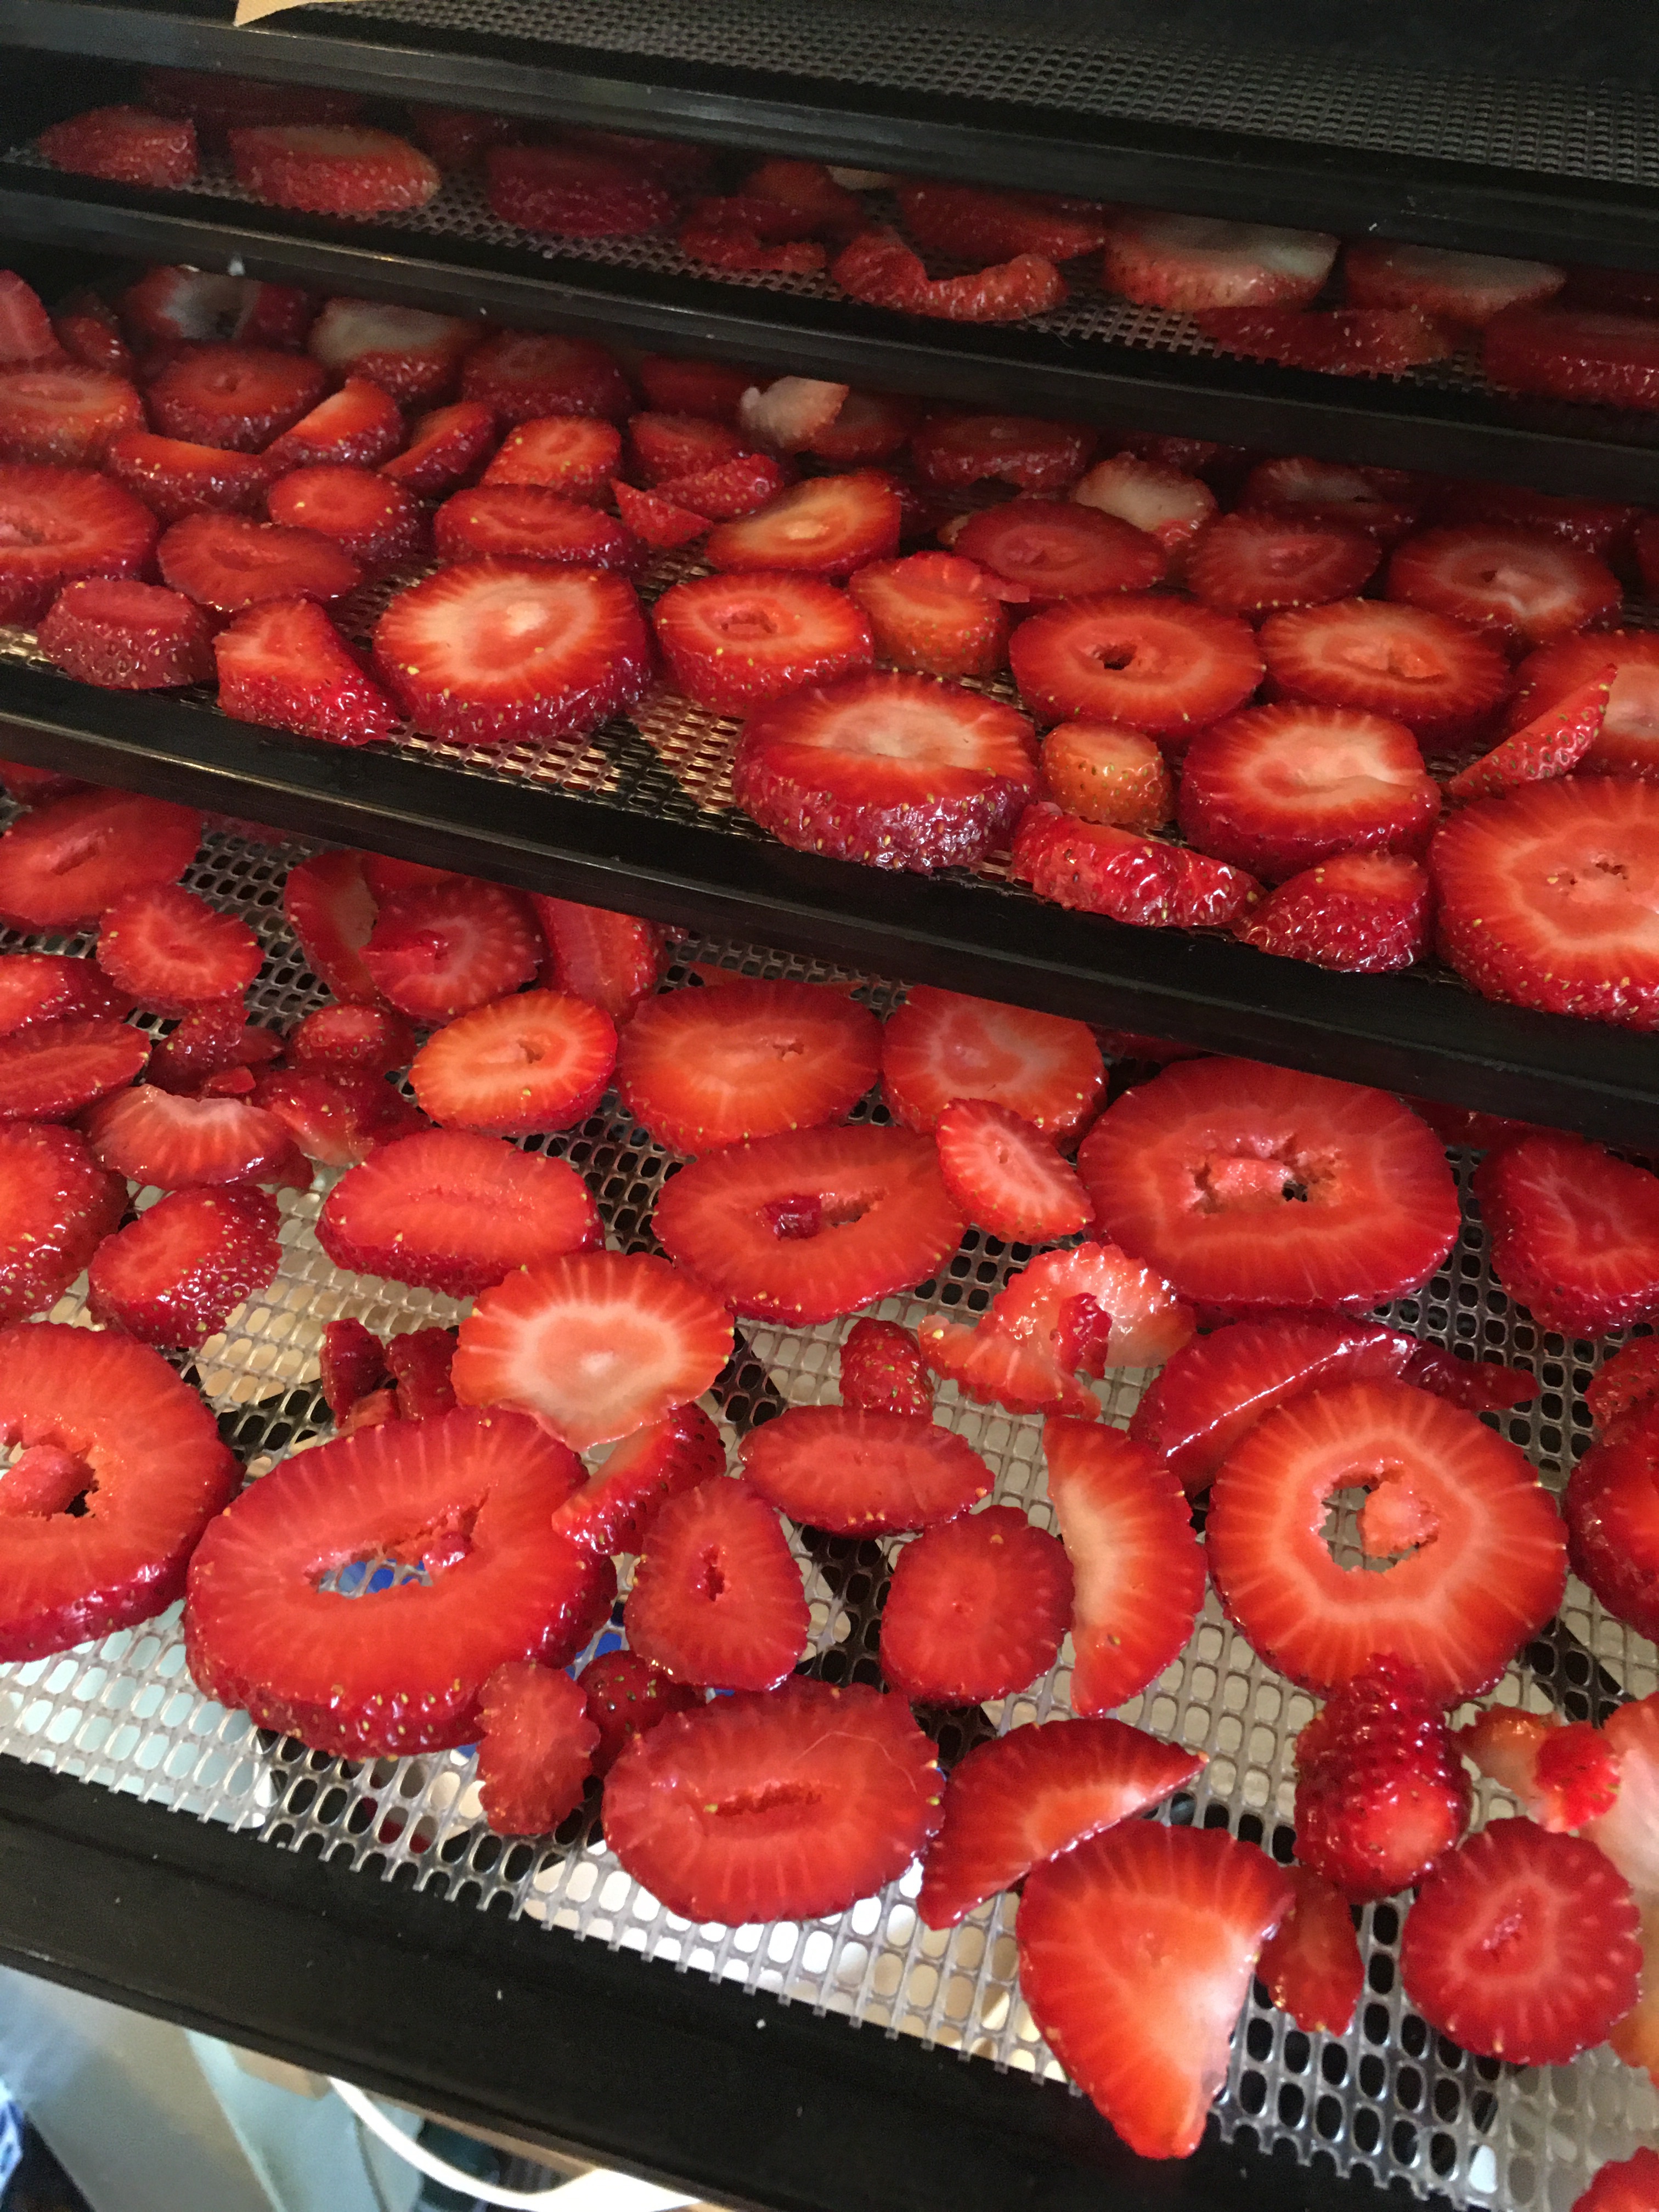 Fresh strawberry slices in the 9 tray Excalibur dehydrator